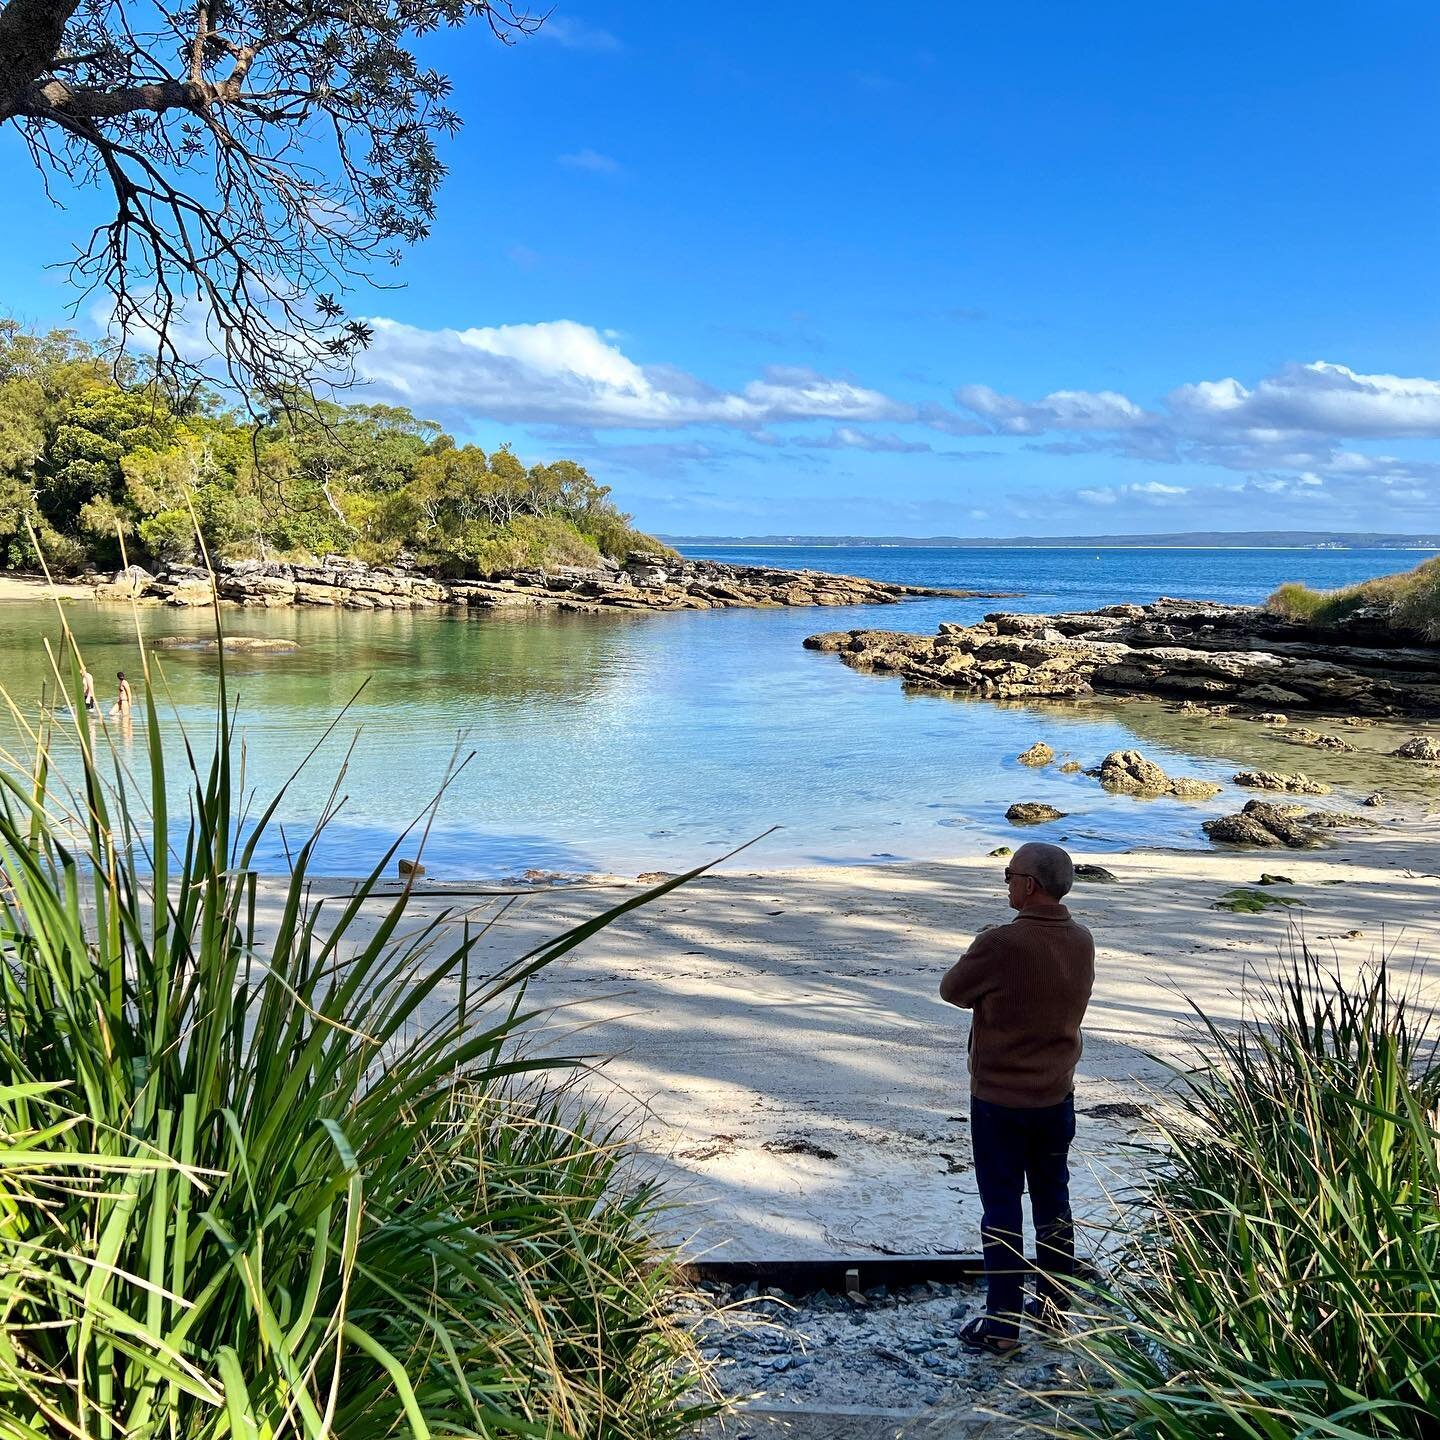 Honeymoon Bay is a tiny and spectacular beach deep inside Department of Defence lands on Point Perpendicular. It&rsquo;s only open to the public on weekends and was well worth the visit. #jervisbay #pointperpendicular #honeymoonbay #holidays @lowy3